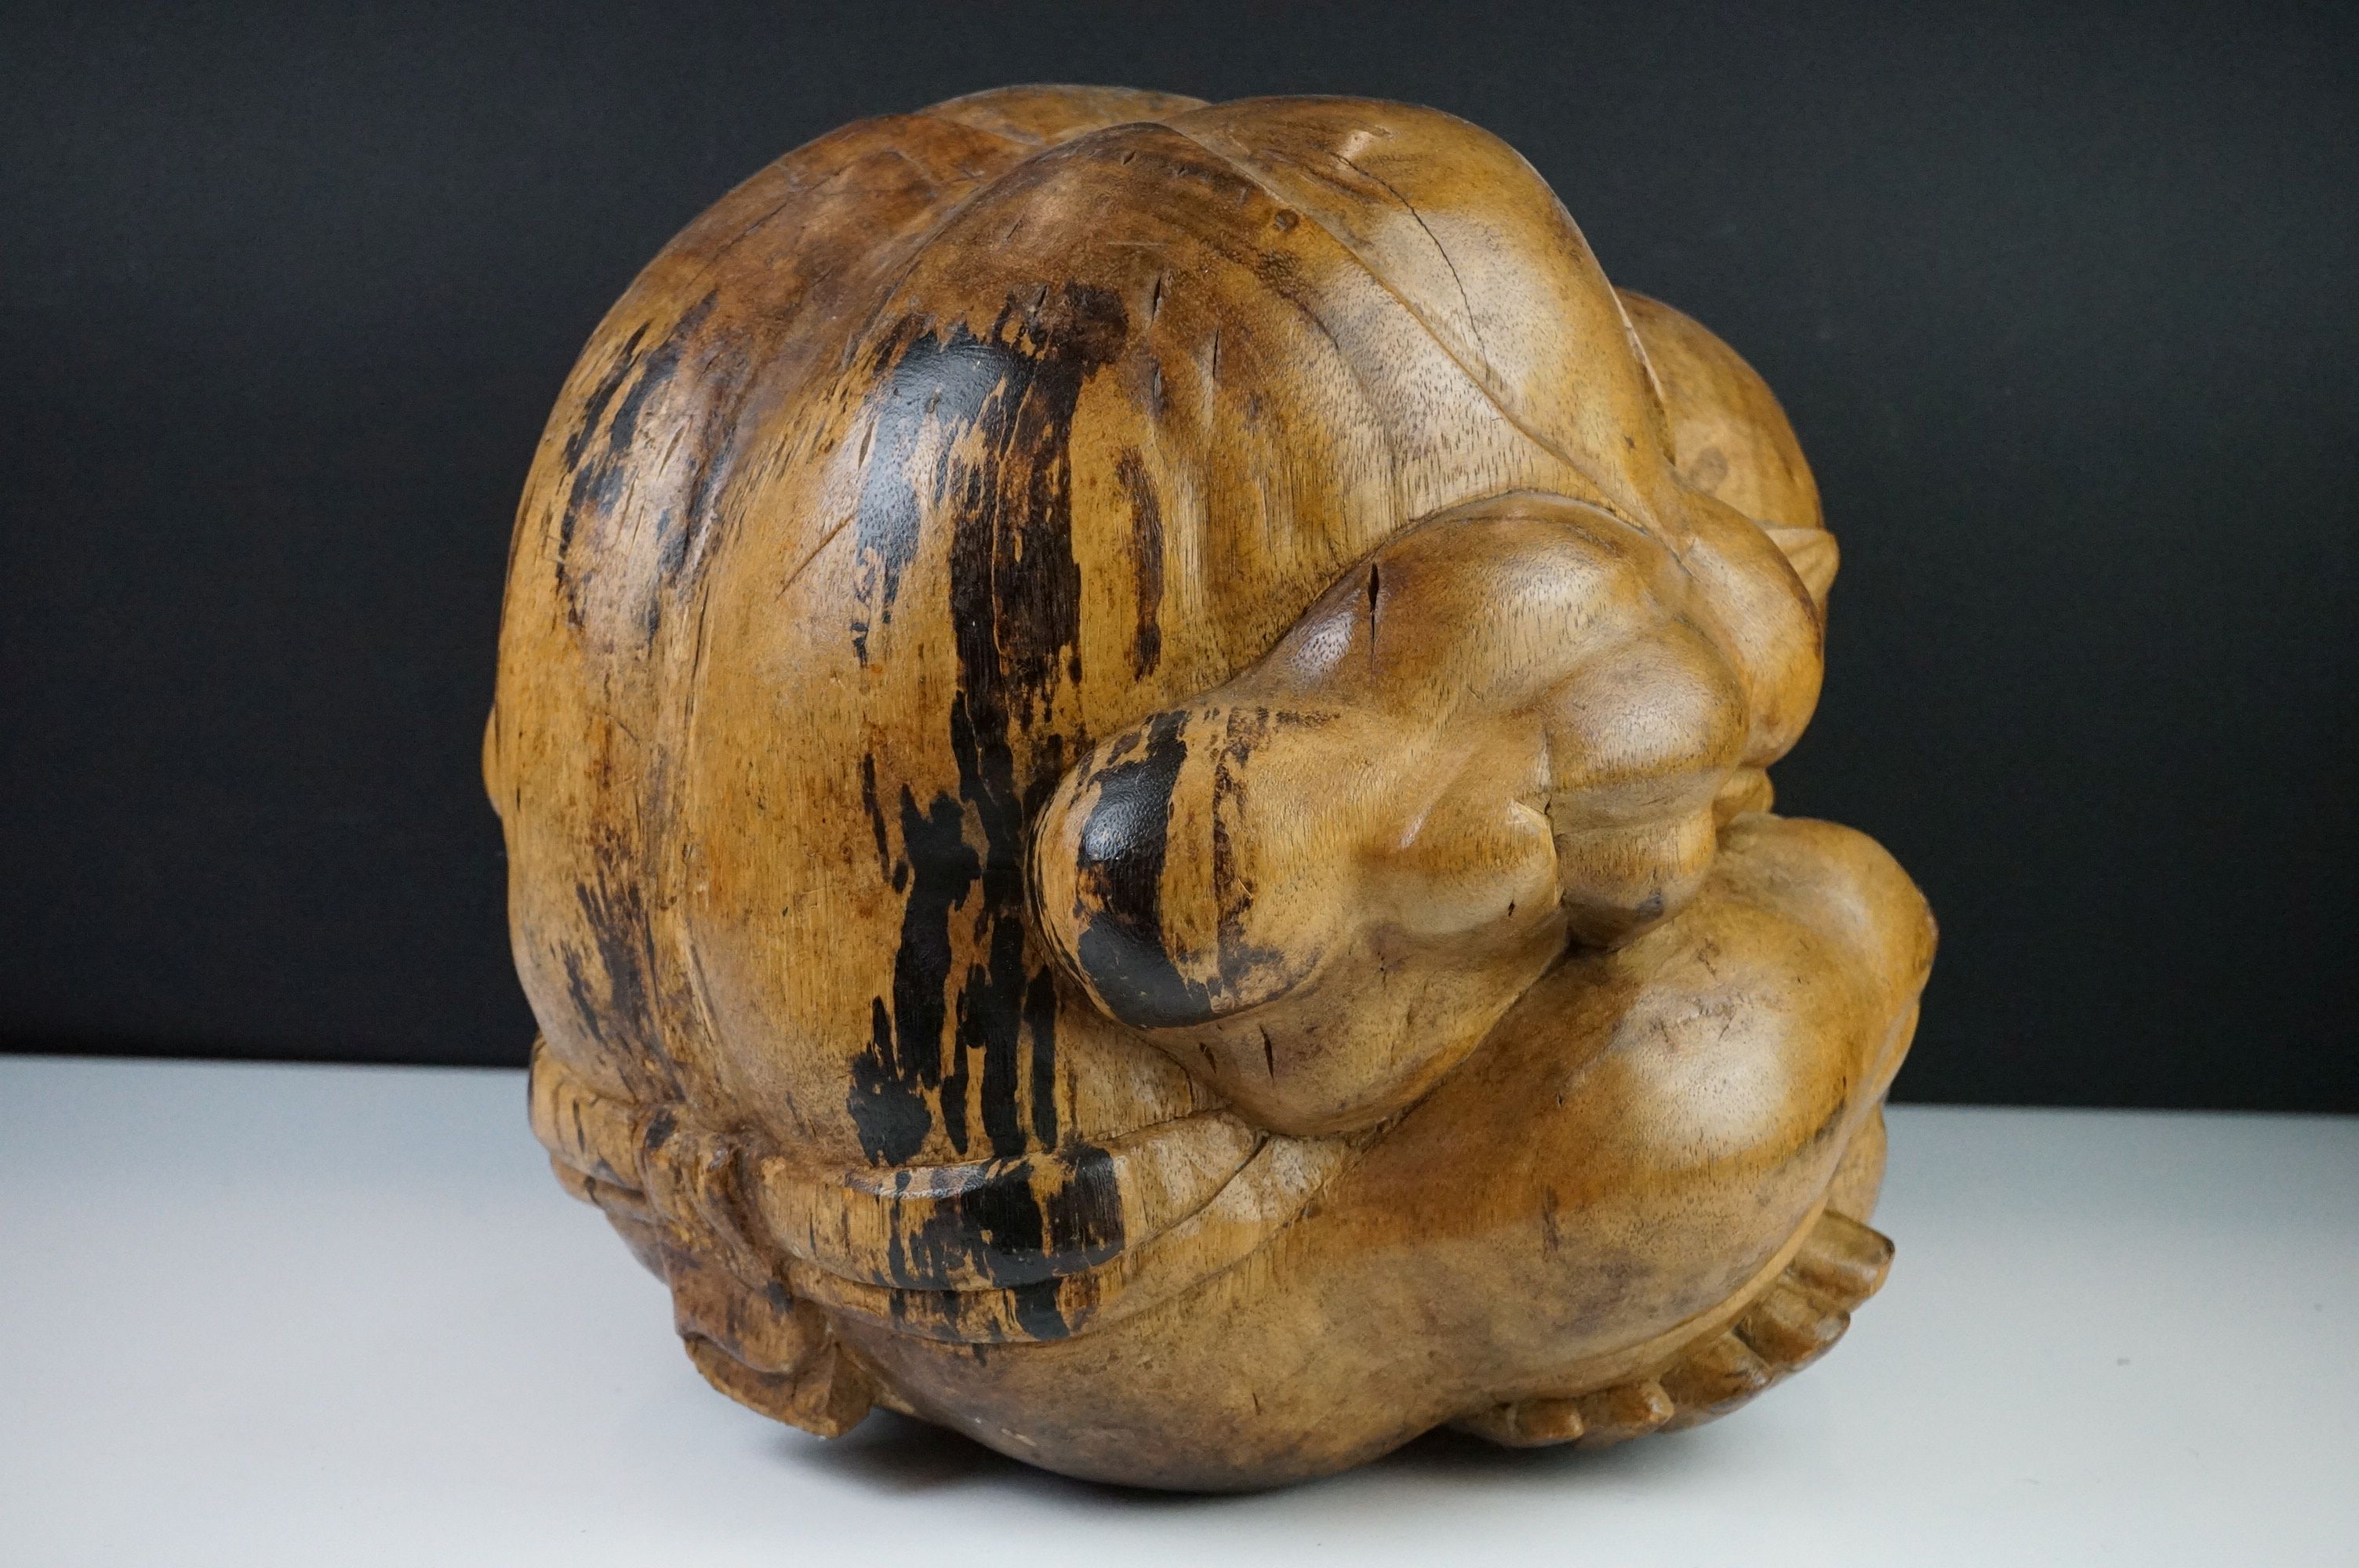 Carved Wooden Sculpture of a Seated Man with his head in his lap, 30cm high x 31cm wide - Image 4 of 8